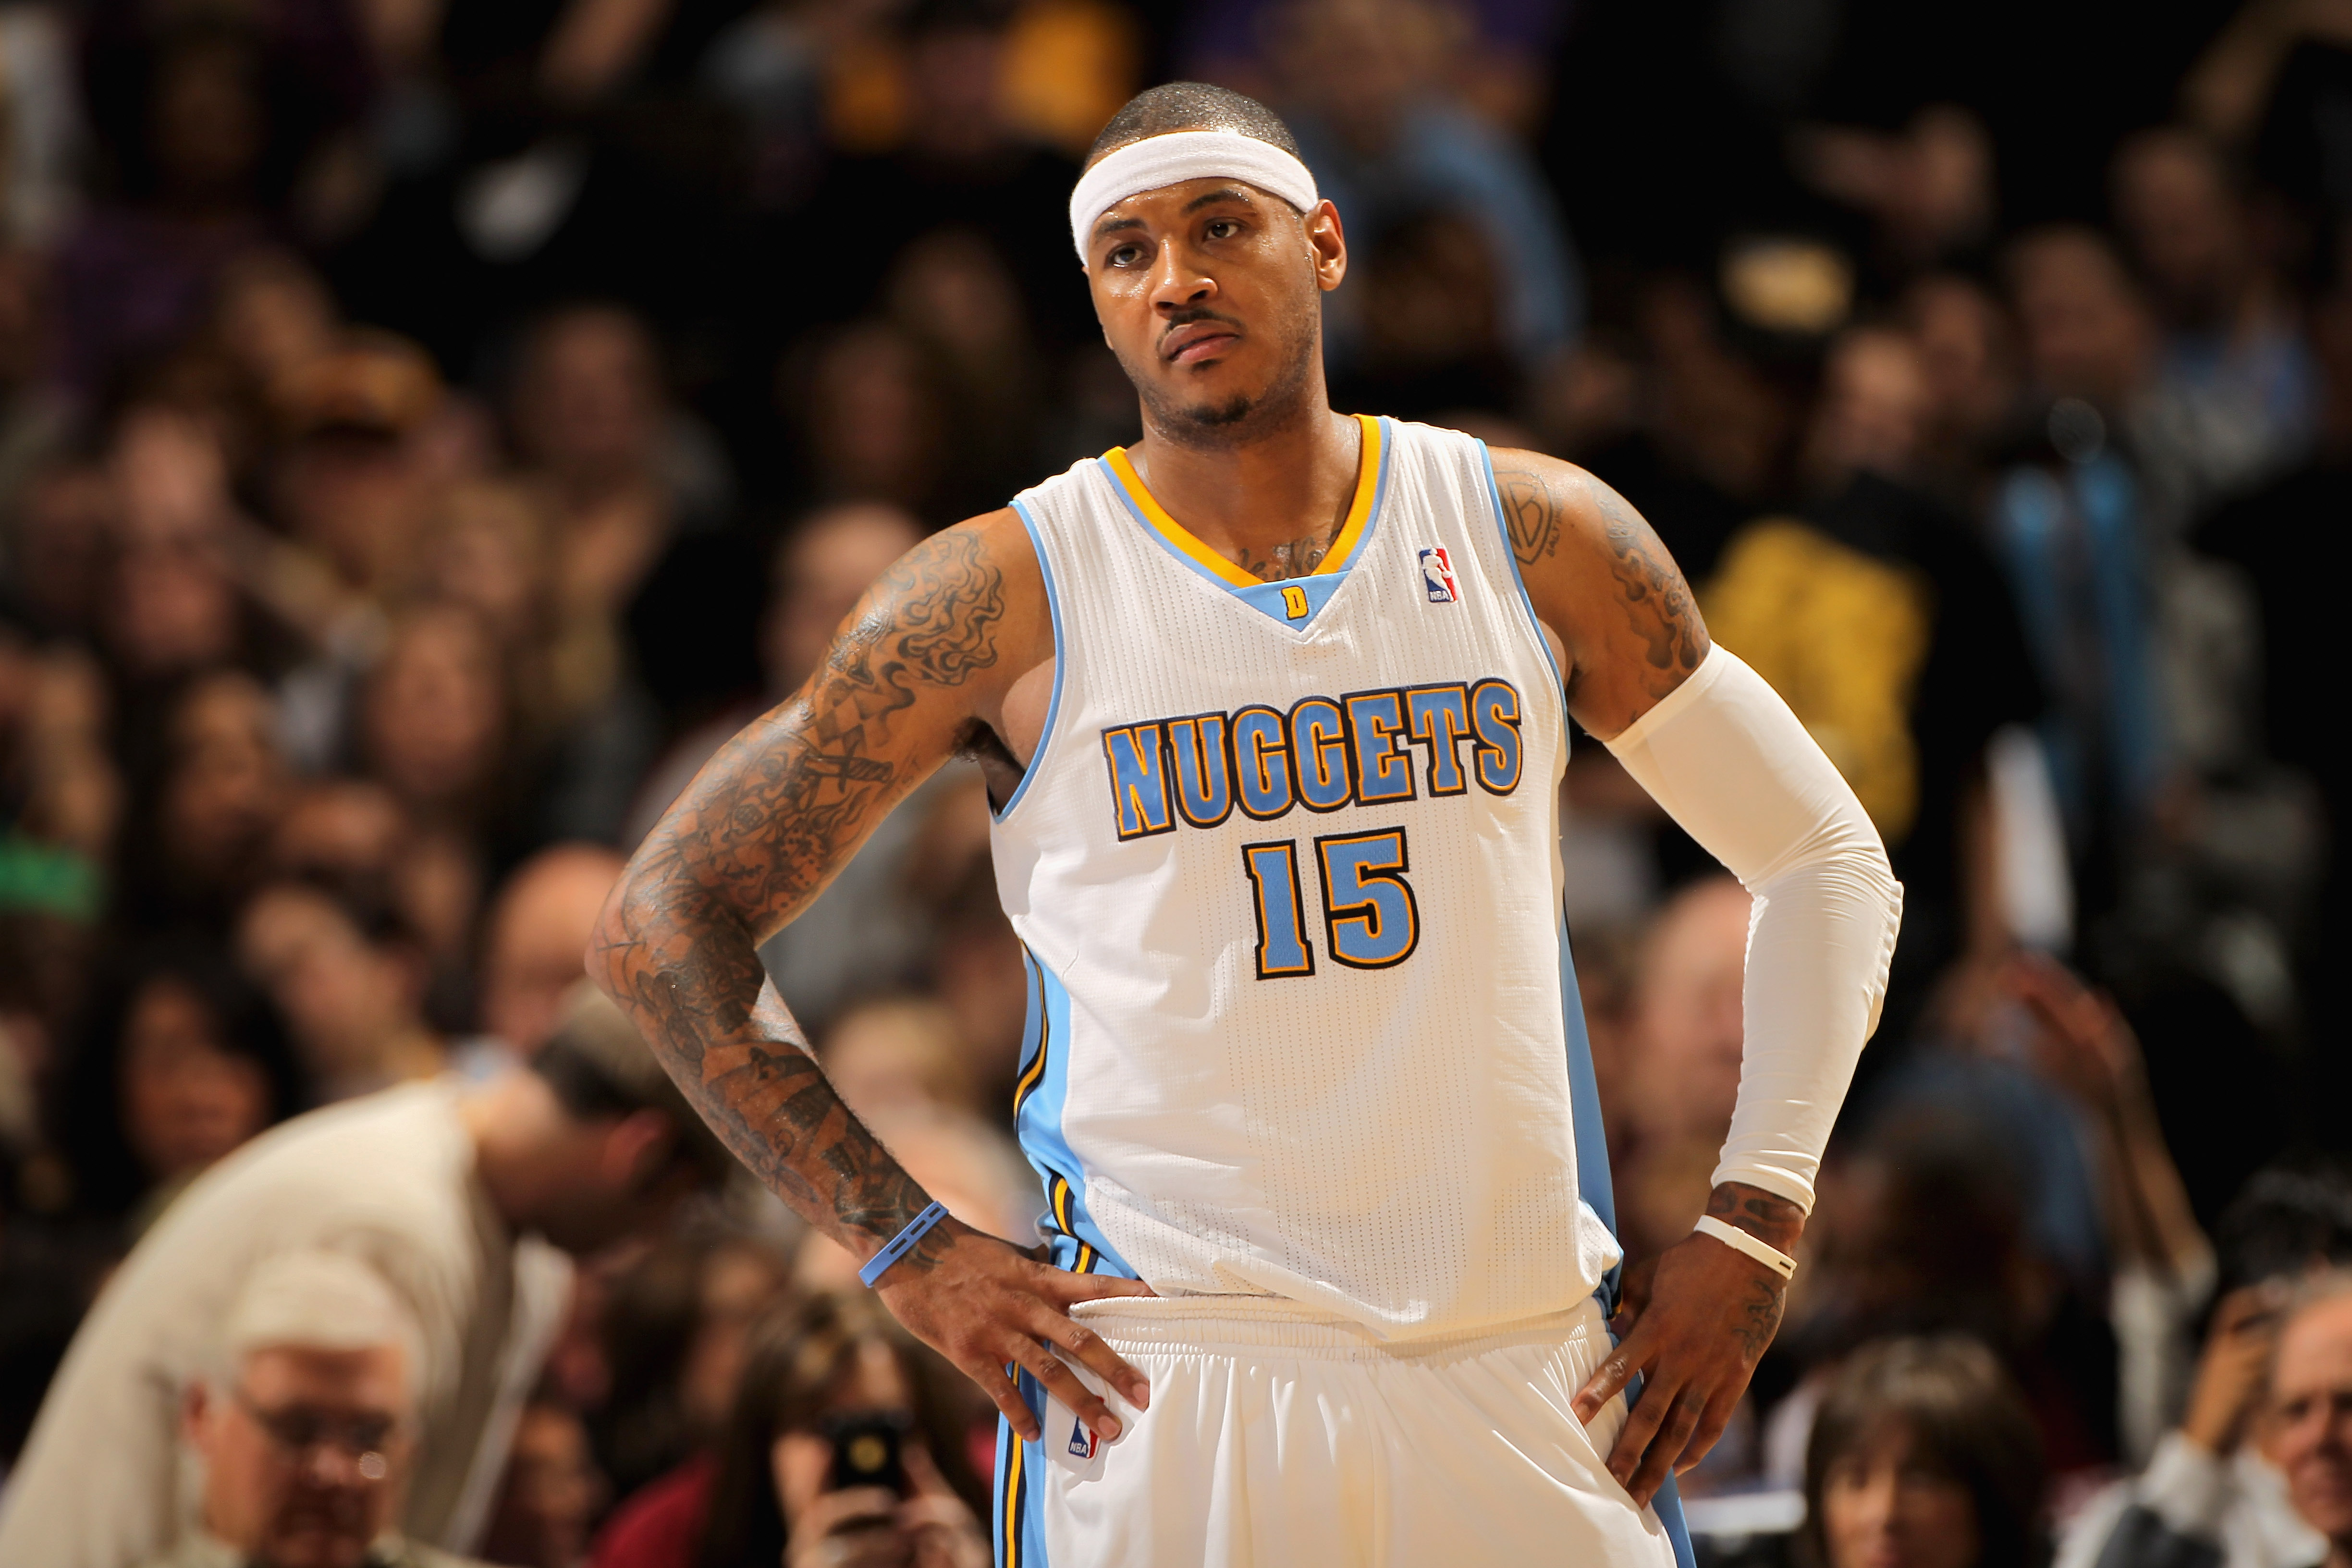 DENVER, CO - JANUARY 21:  Carmelo Anthony #15 of the Denver Nuggets looks on during a break in the action against the Los Angeles Lakers at the Pepsi Center on January 21, 2011 in Denver, Colorado. The Lakers defeated the Nuggets 107-97. NOTE TO USER: Use